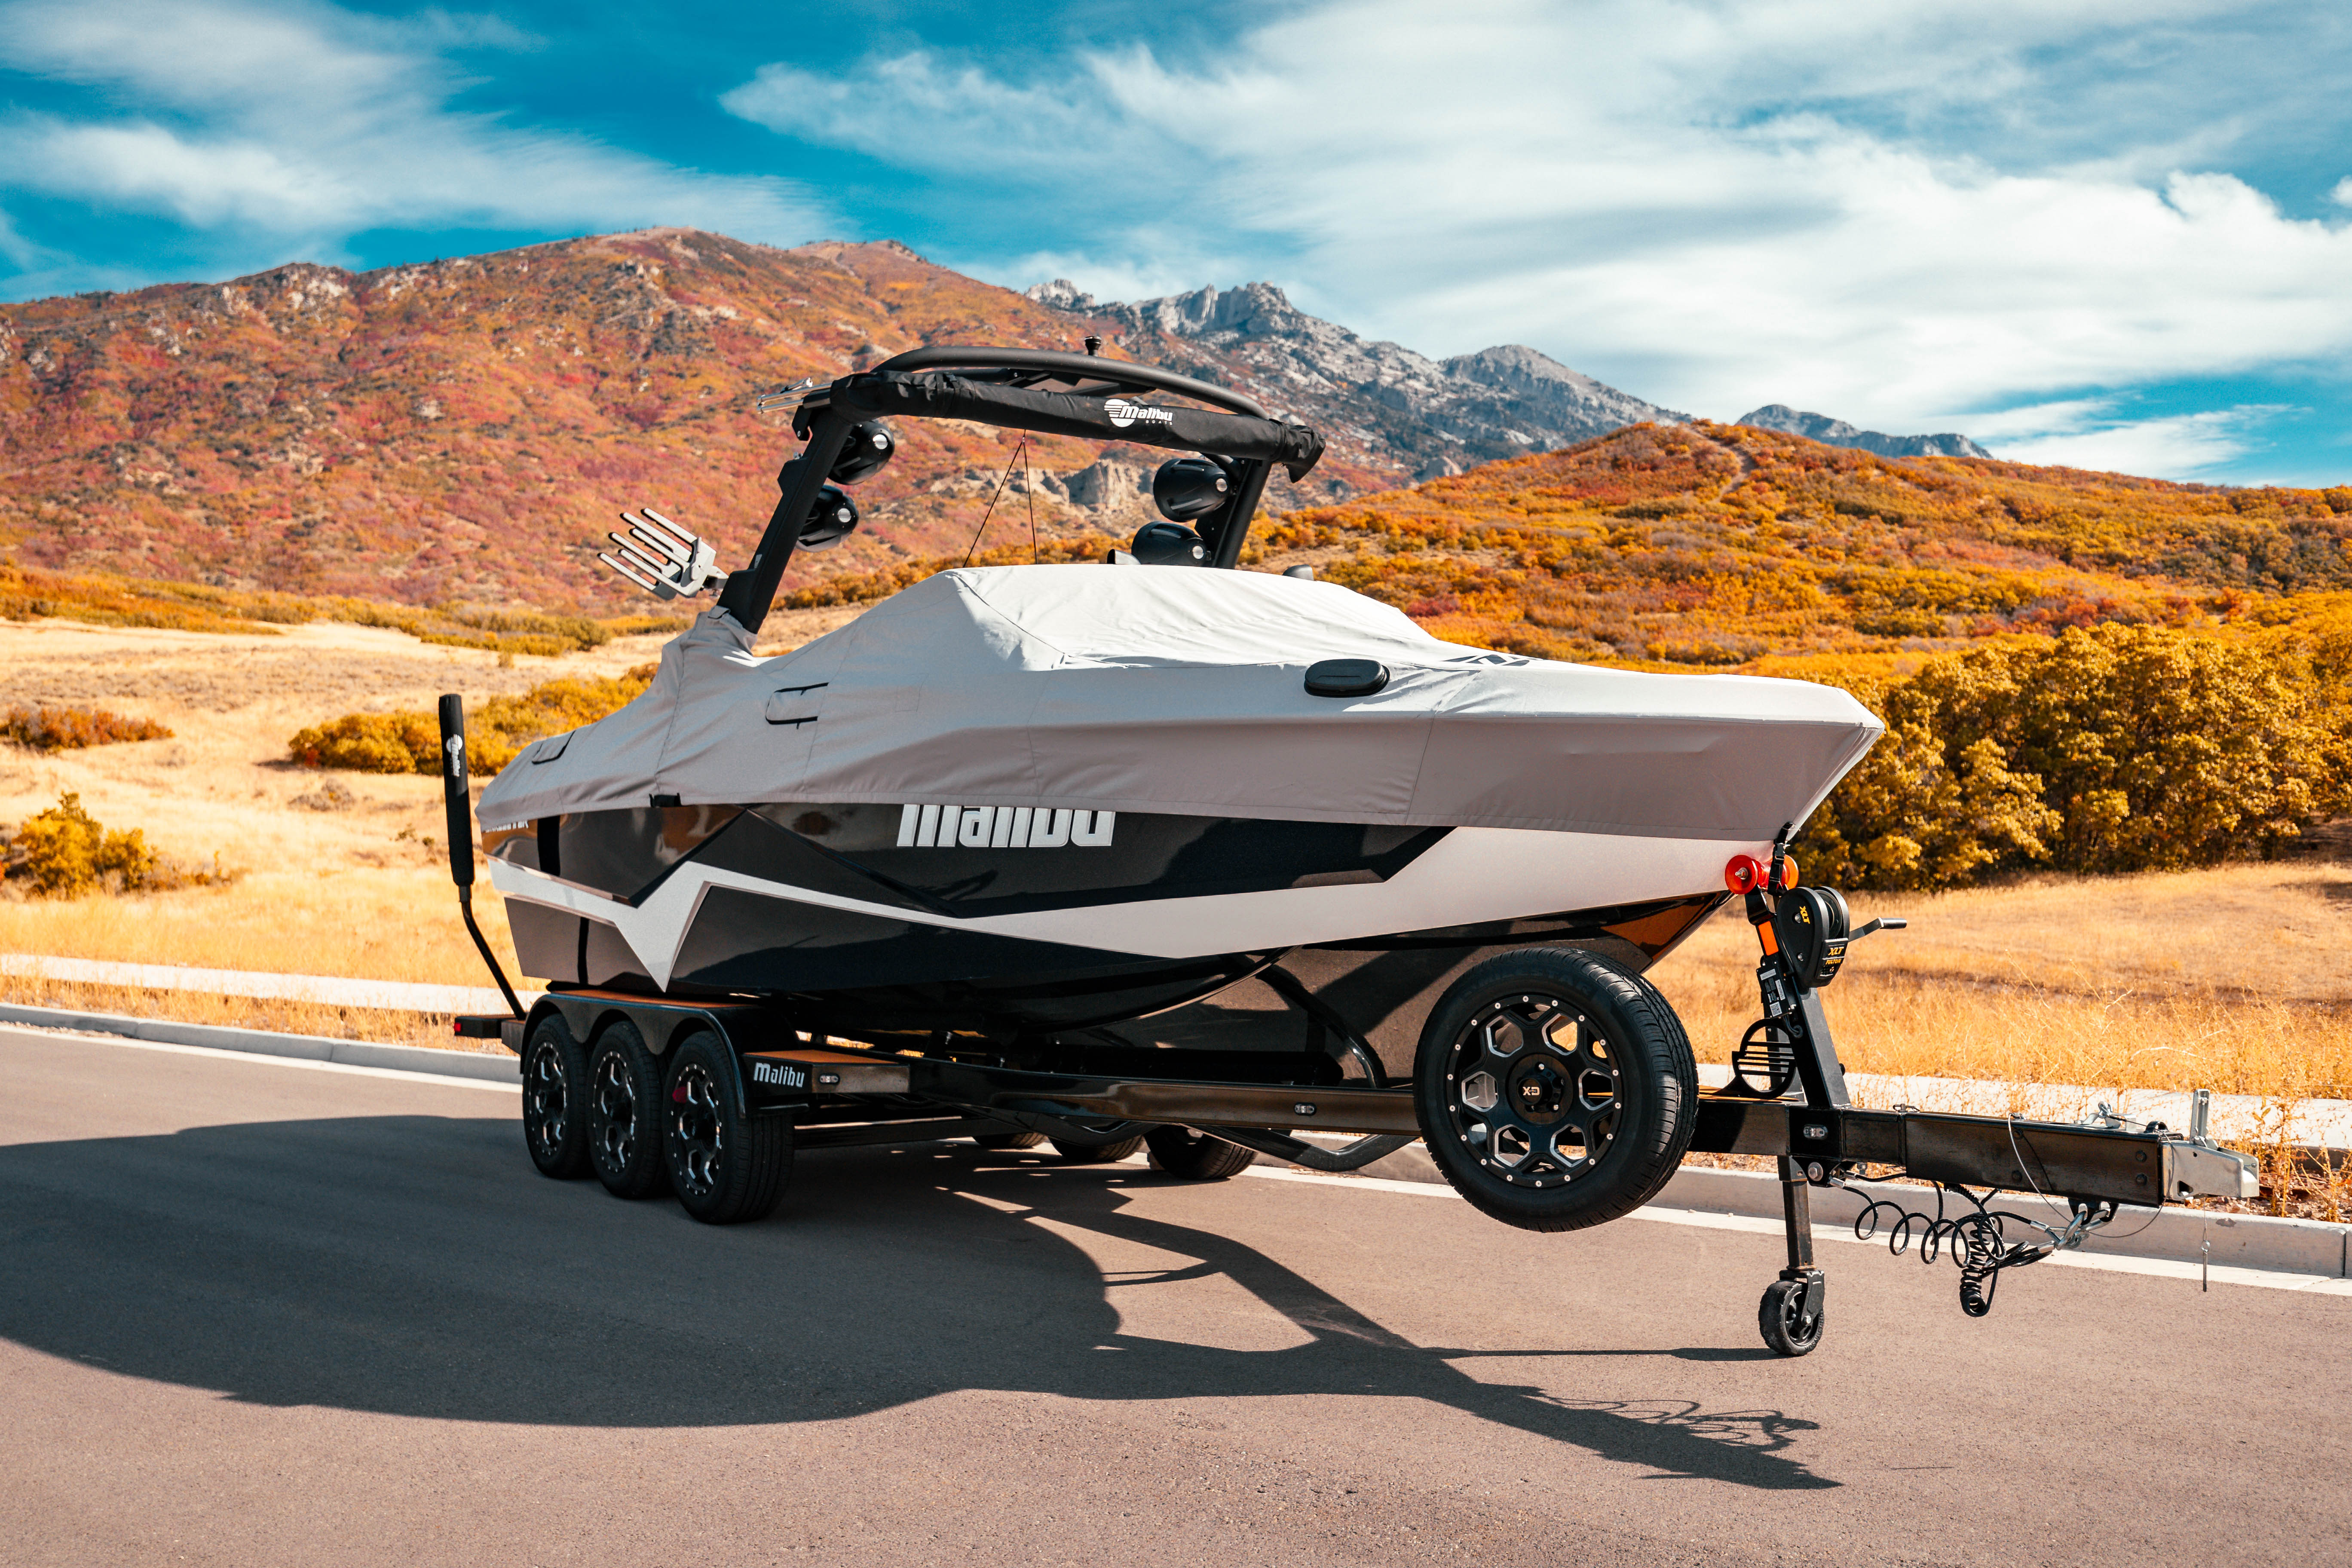 Top 10 Tips to Winterize Your Boat